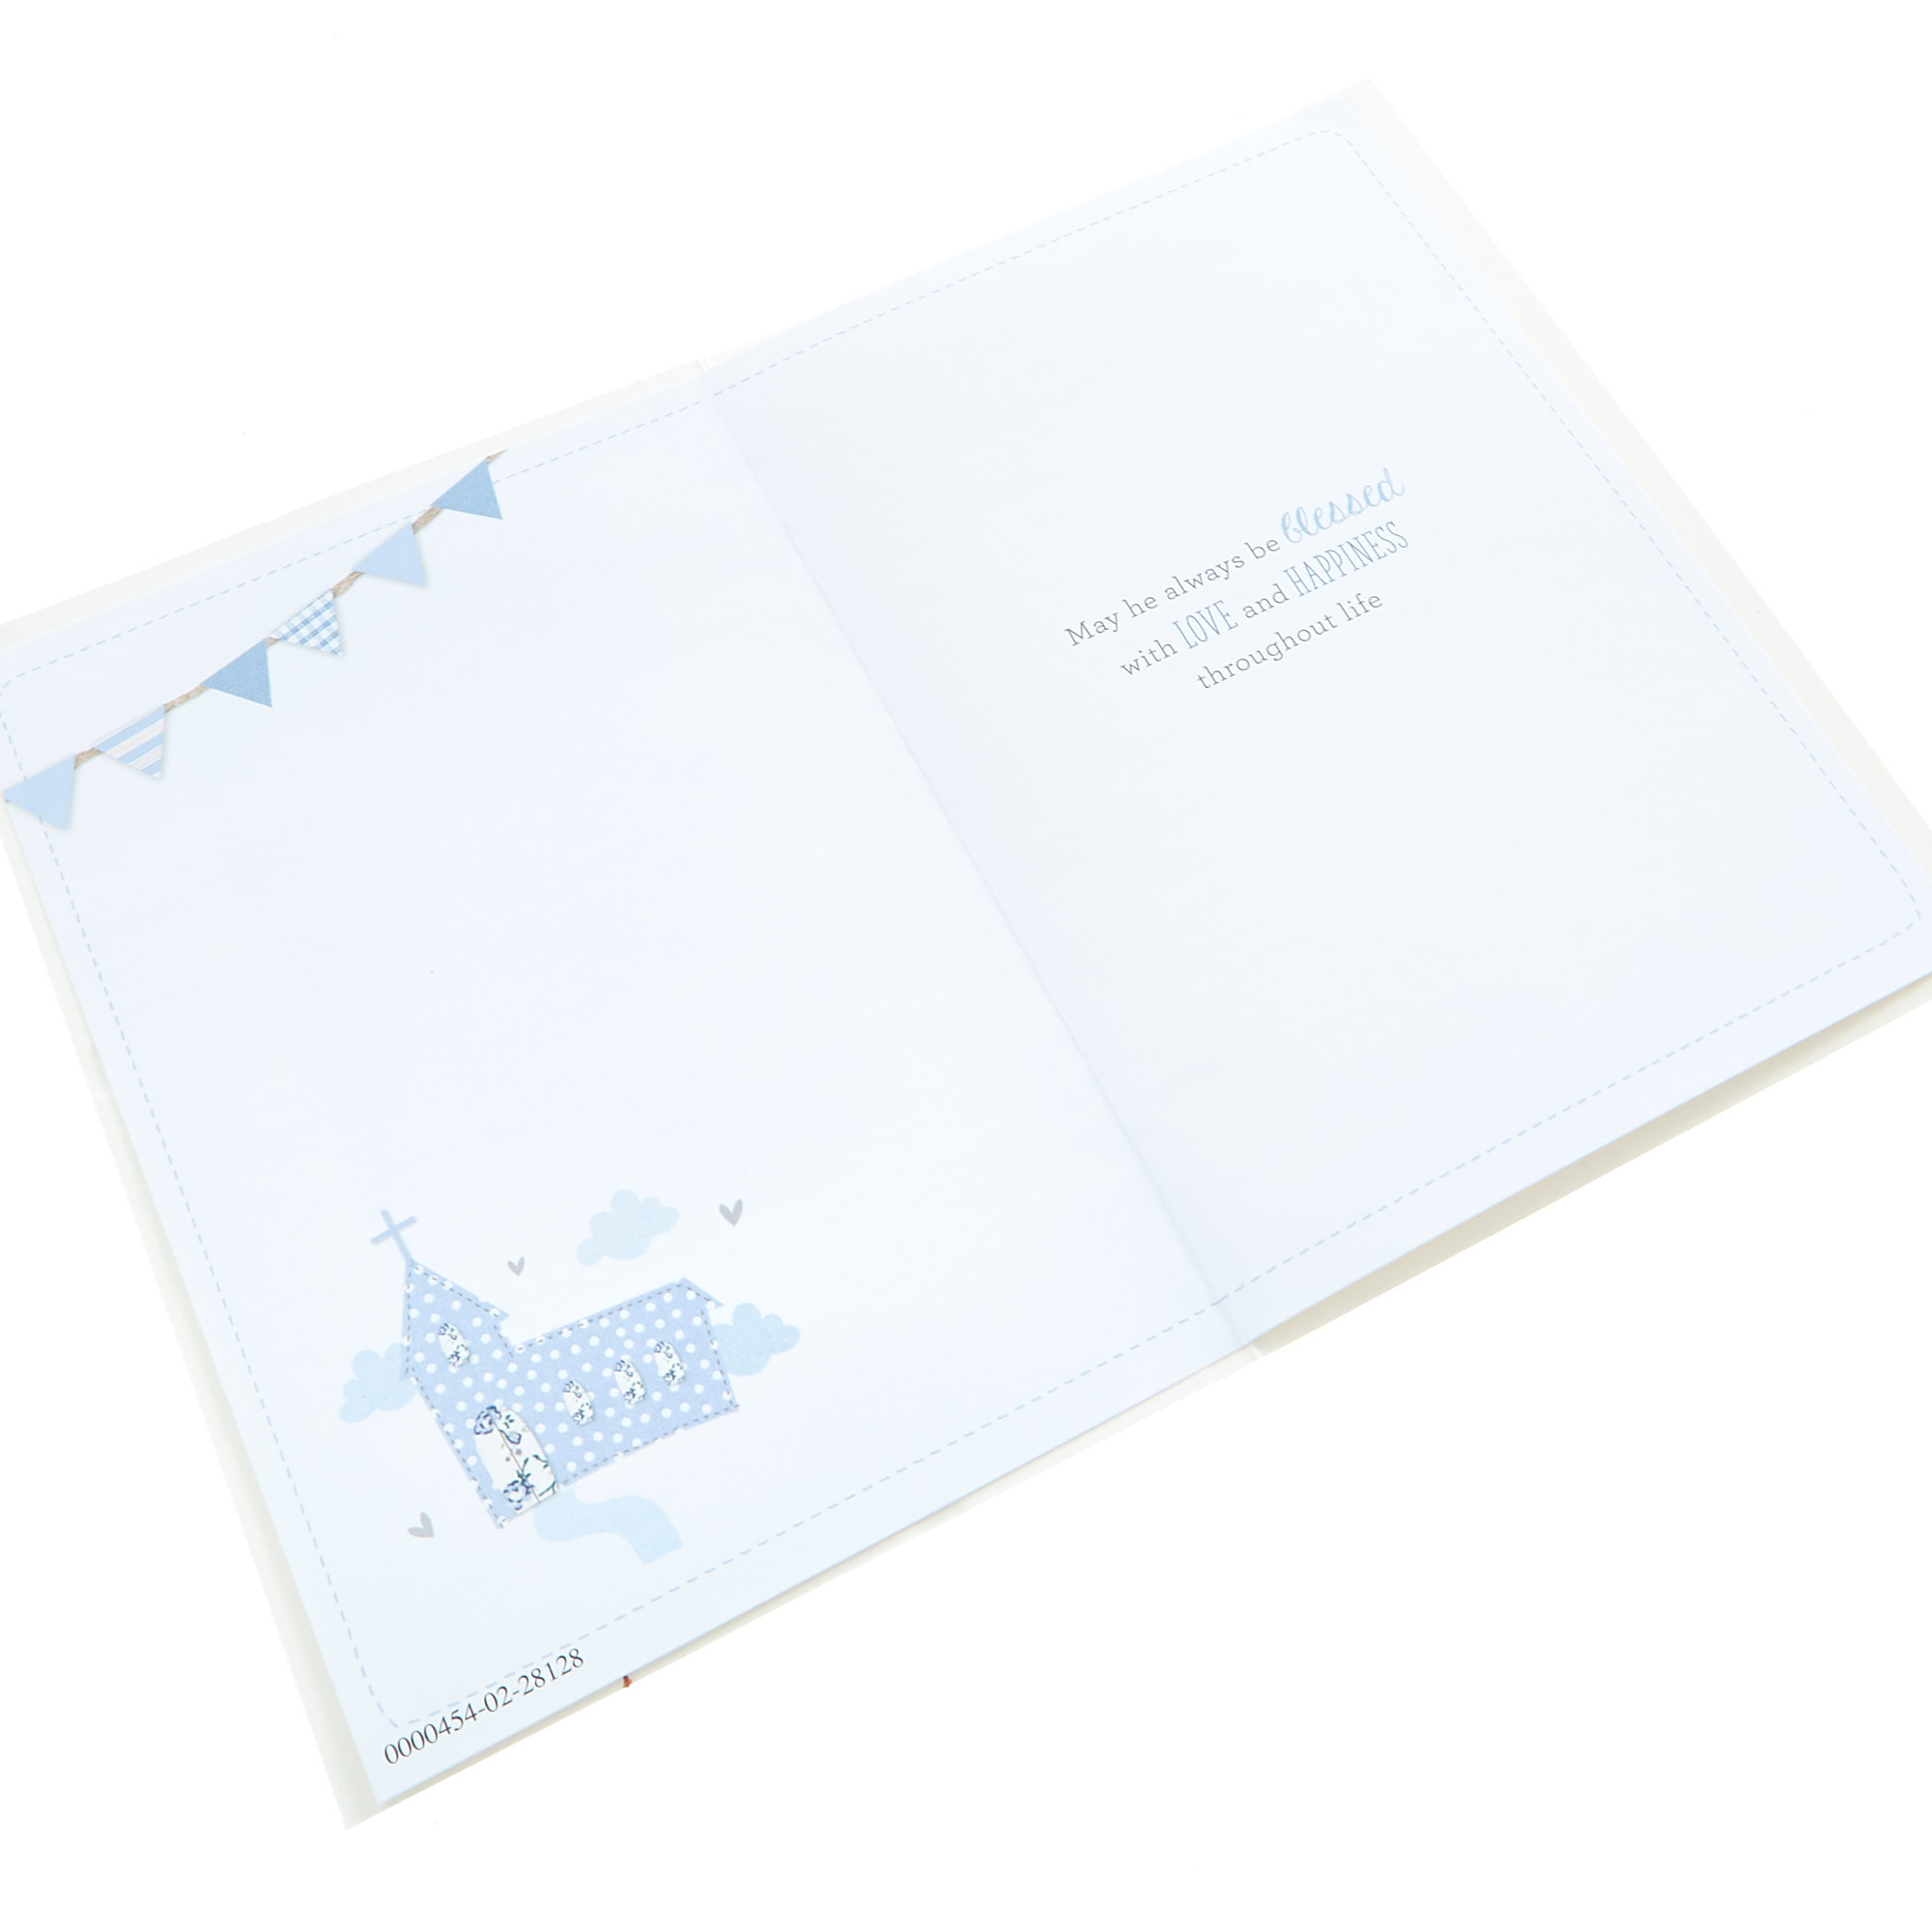 Christening Card - Special Baby Boy